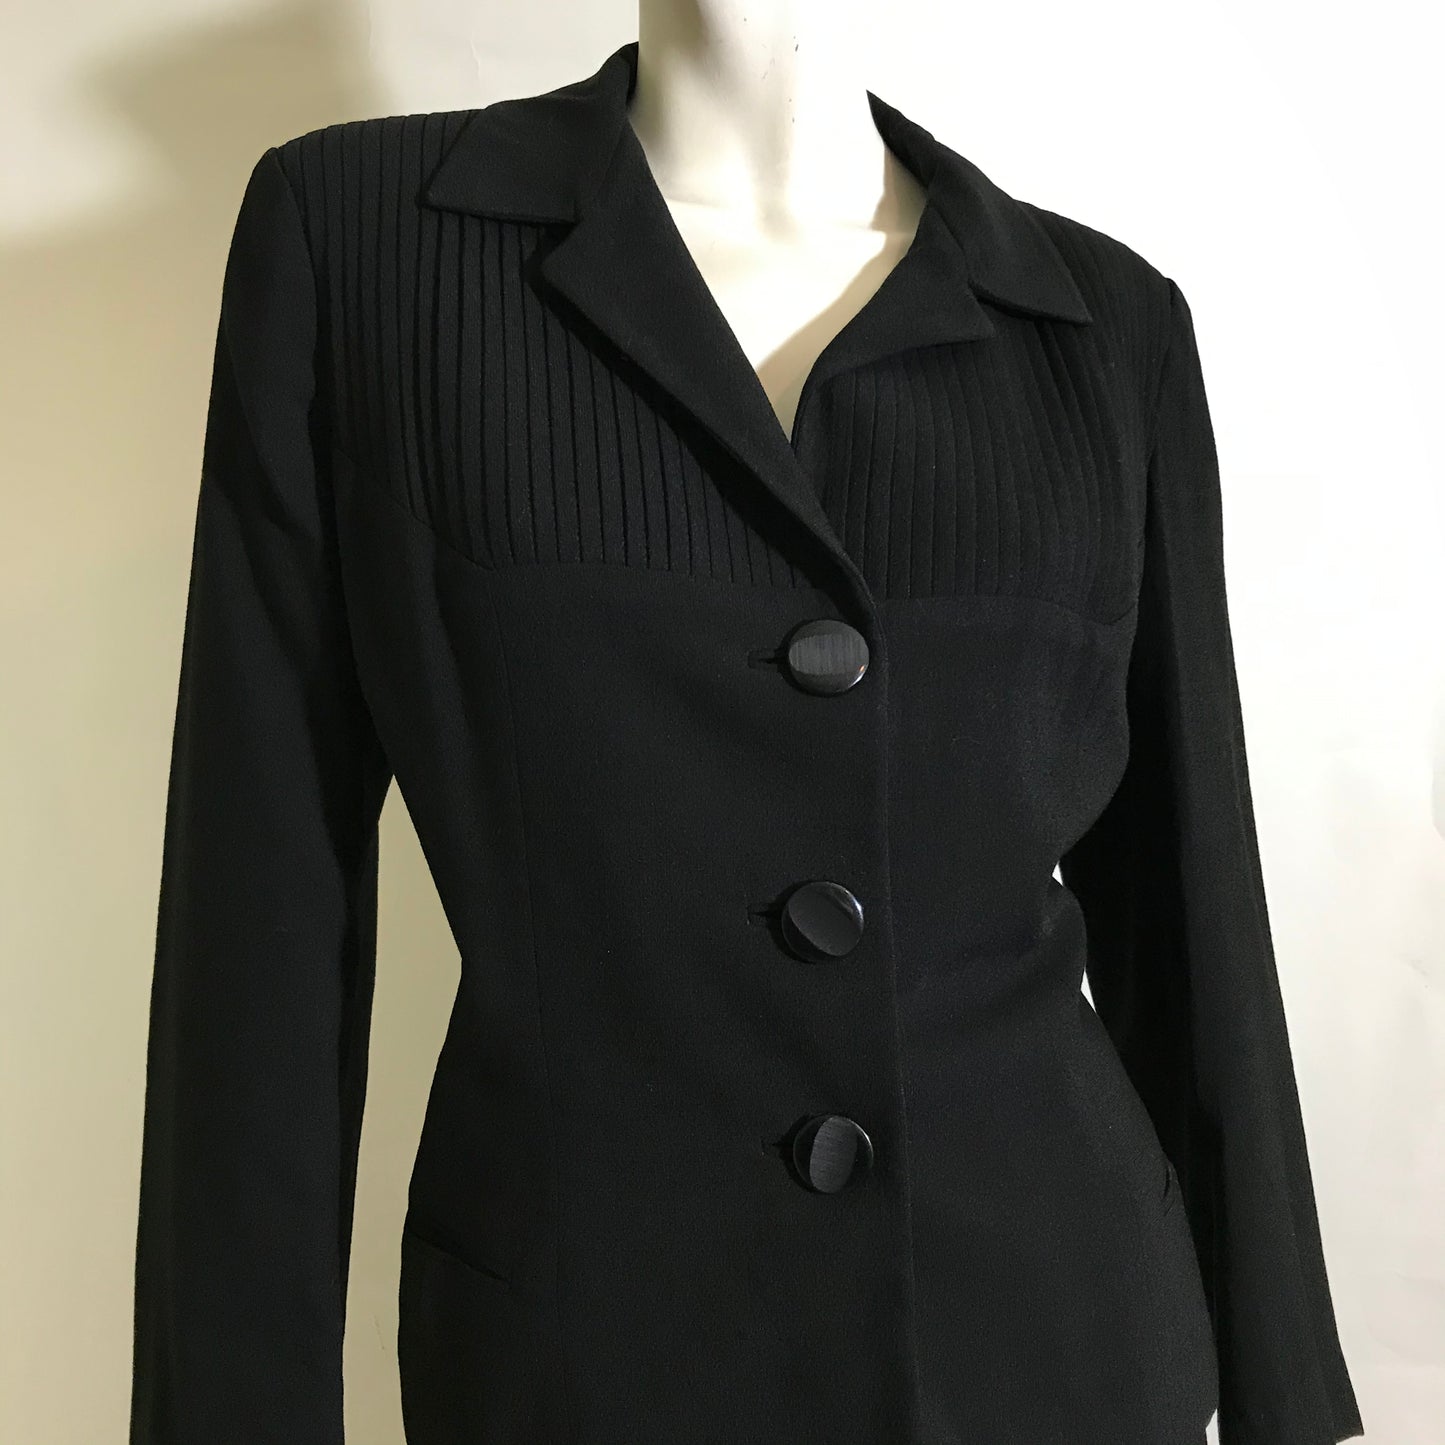 Black Wool Classic Suit with Pleated Accents circa 1950s